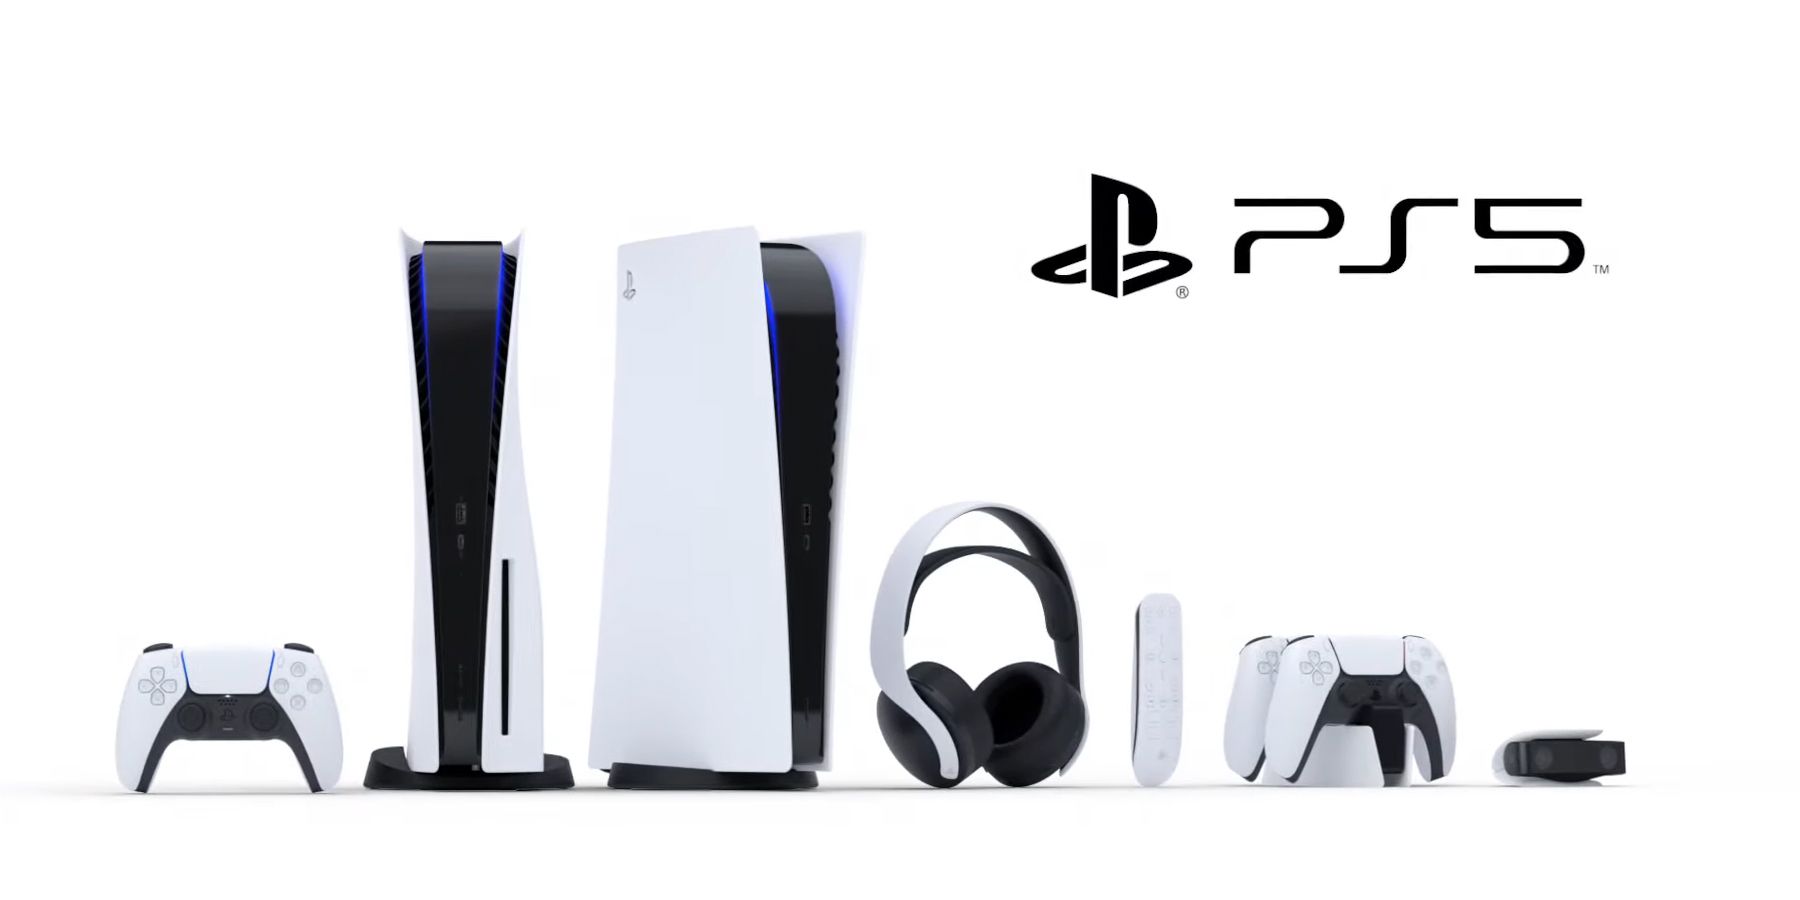 PS5 Cross-Gen Saves With PS4 Are ‘Developer Decision’ Not Up To Sony